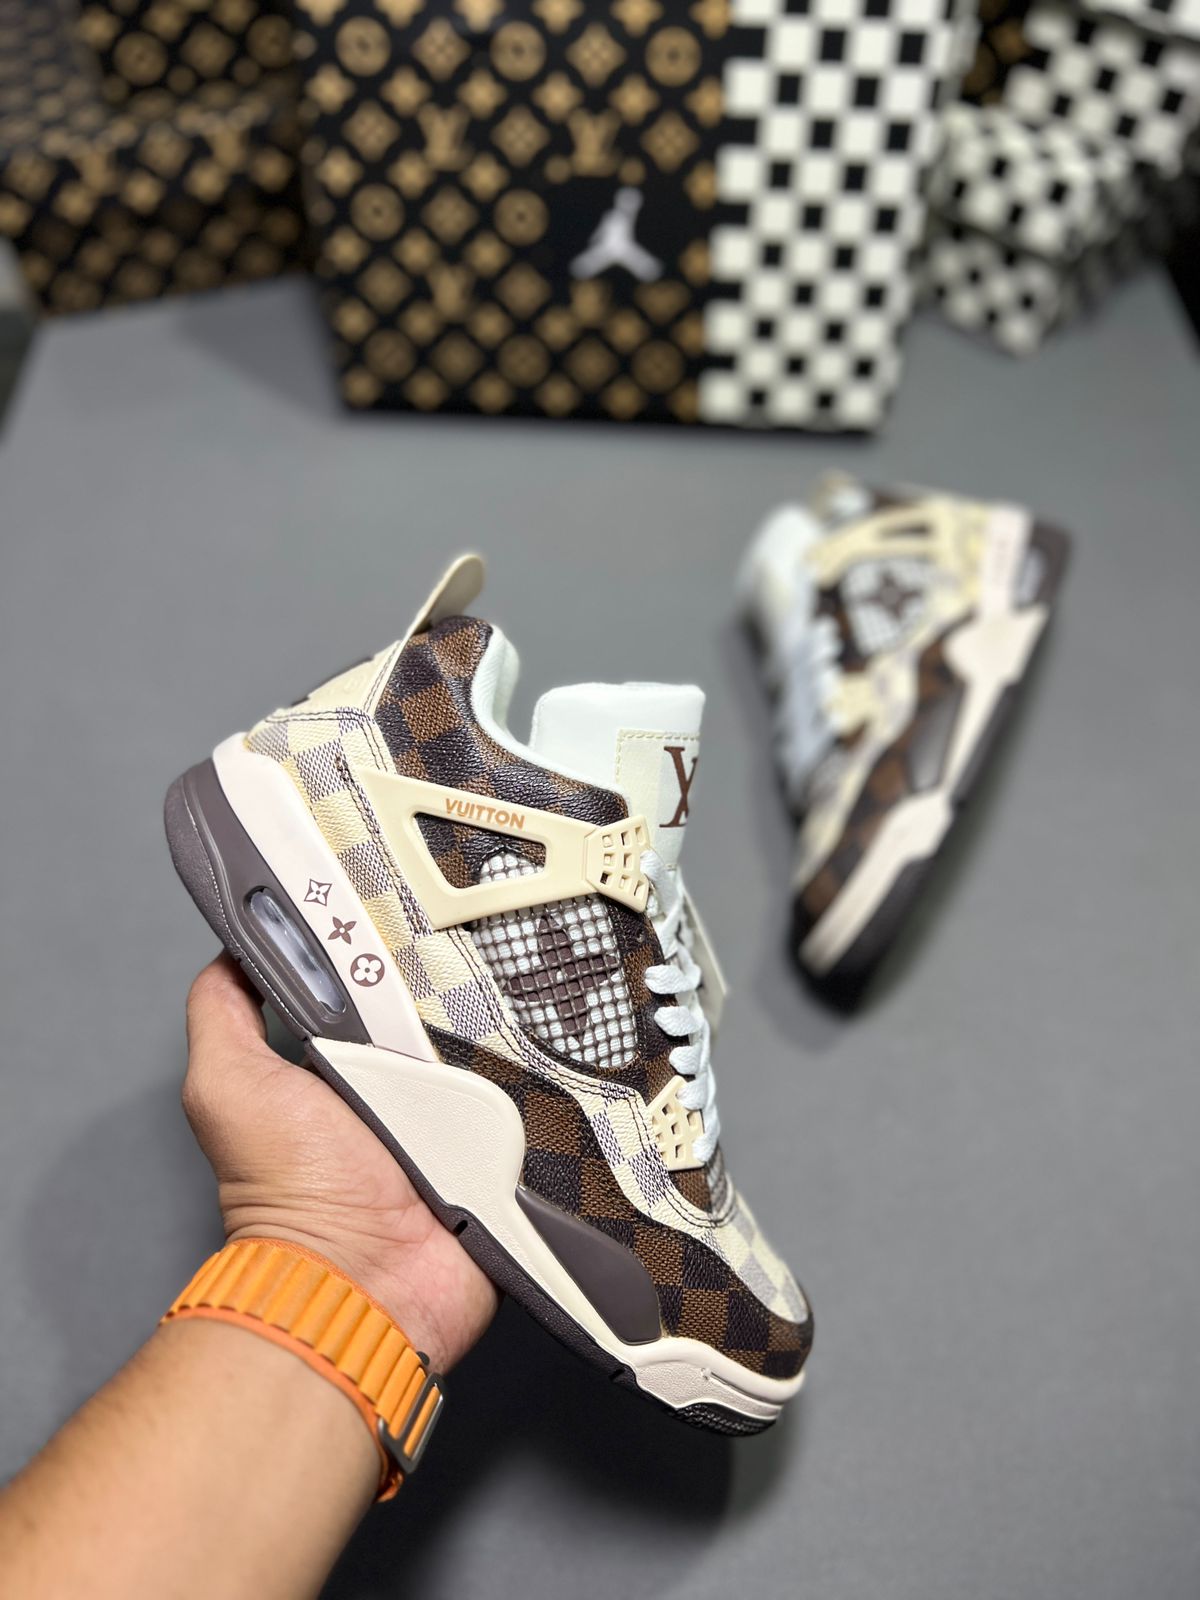 Retro Four Lv Edition Sneakers Limited Stock